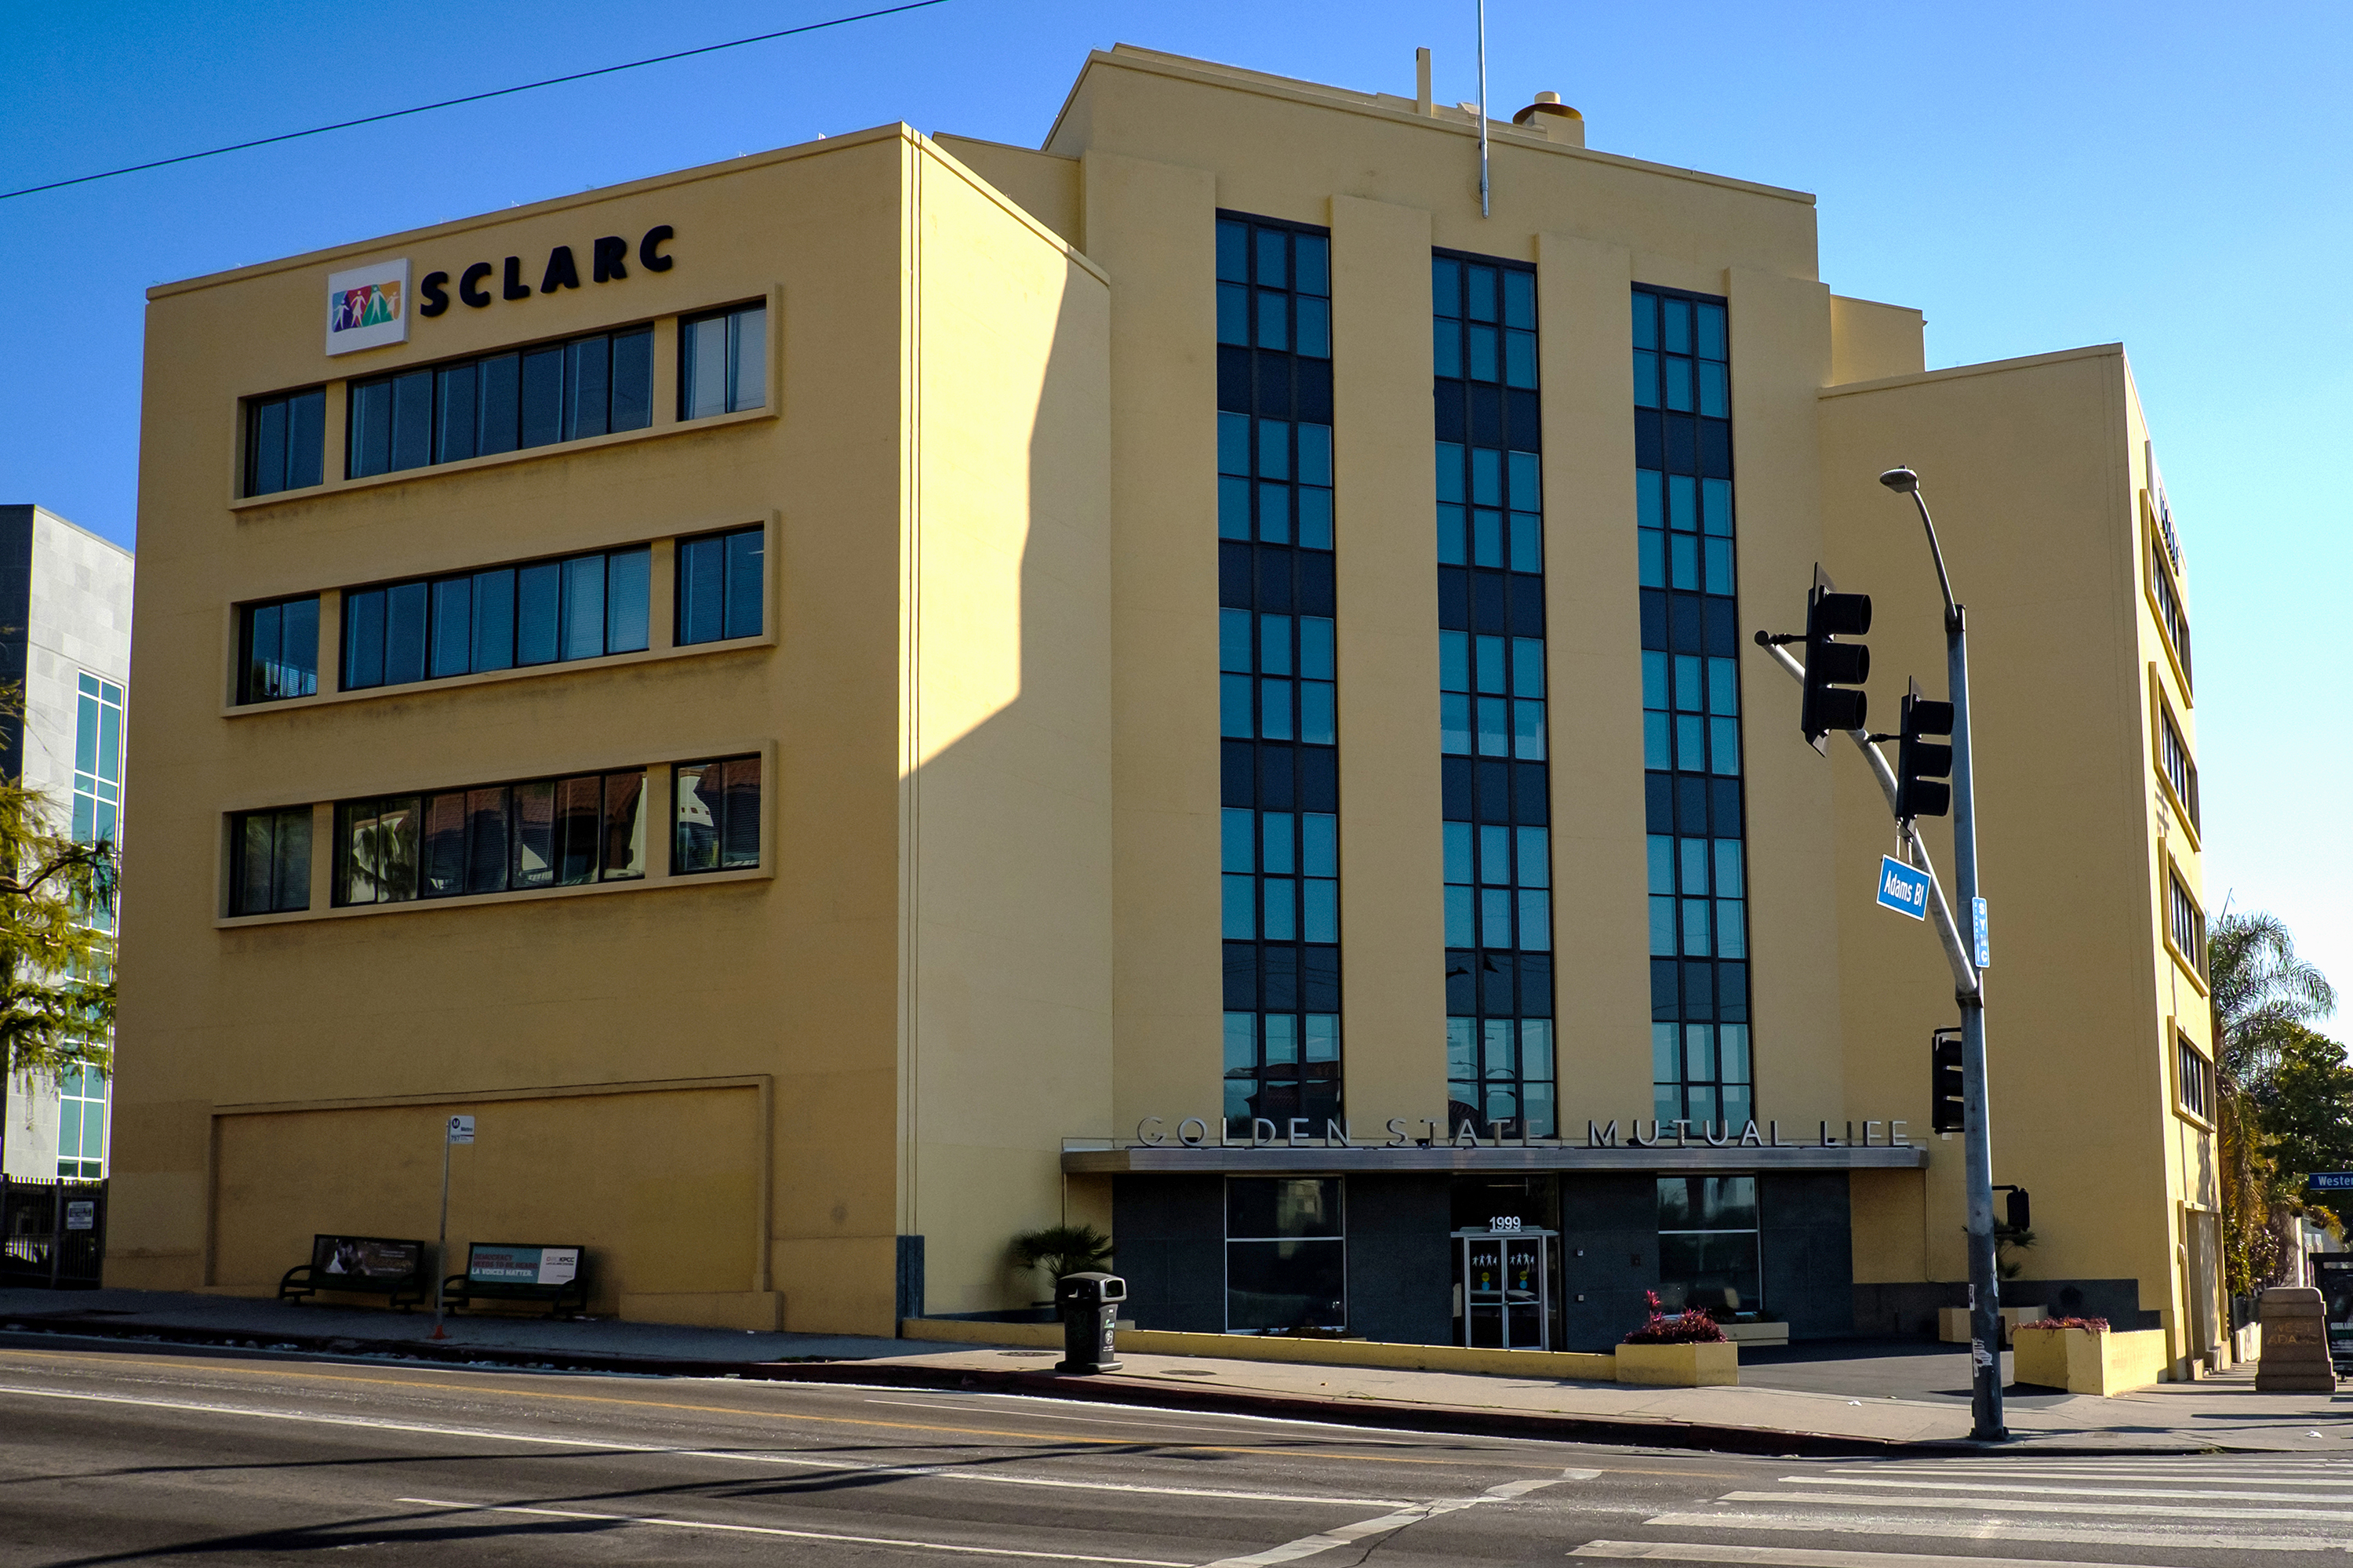 A yellow, 1940s-era mid-rise building at an intersection.